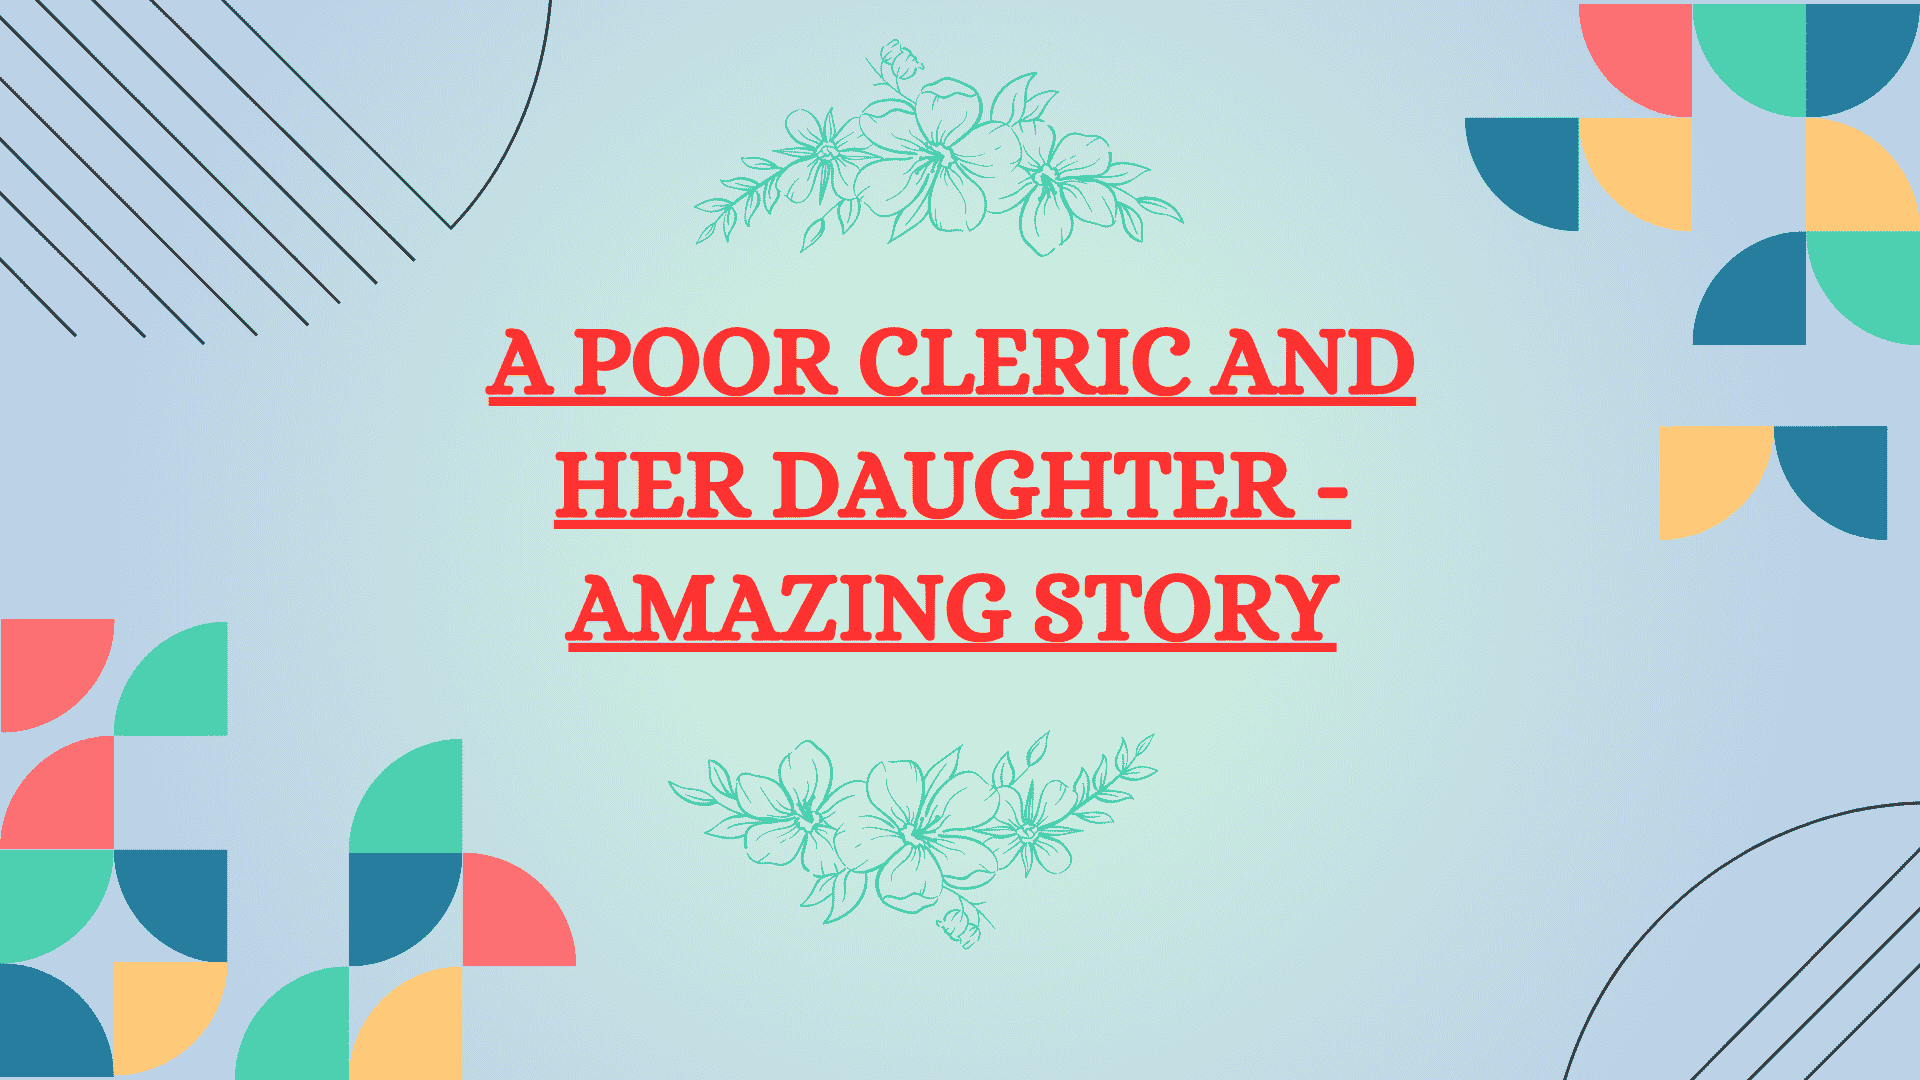 A poor cleric and her daughter - Amazing story